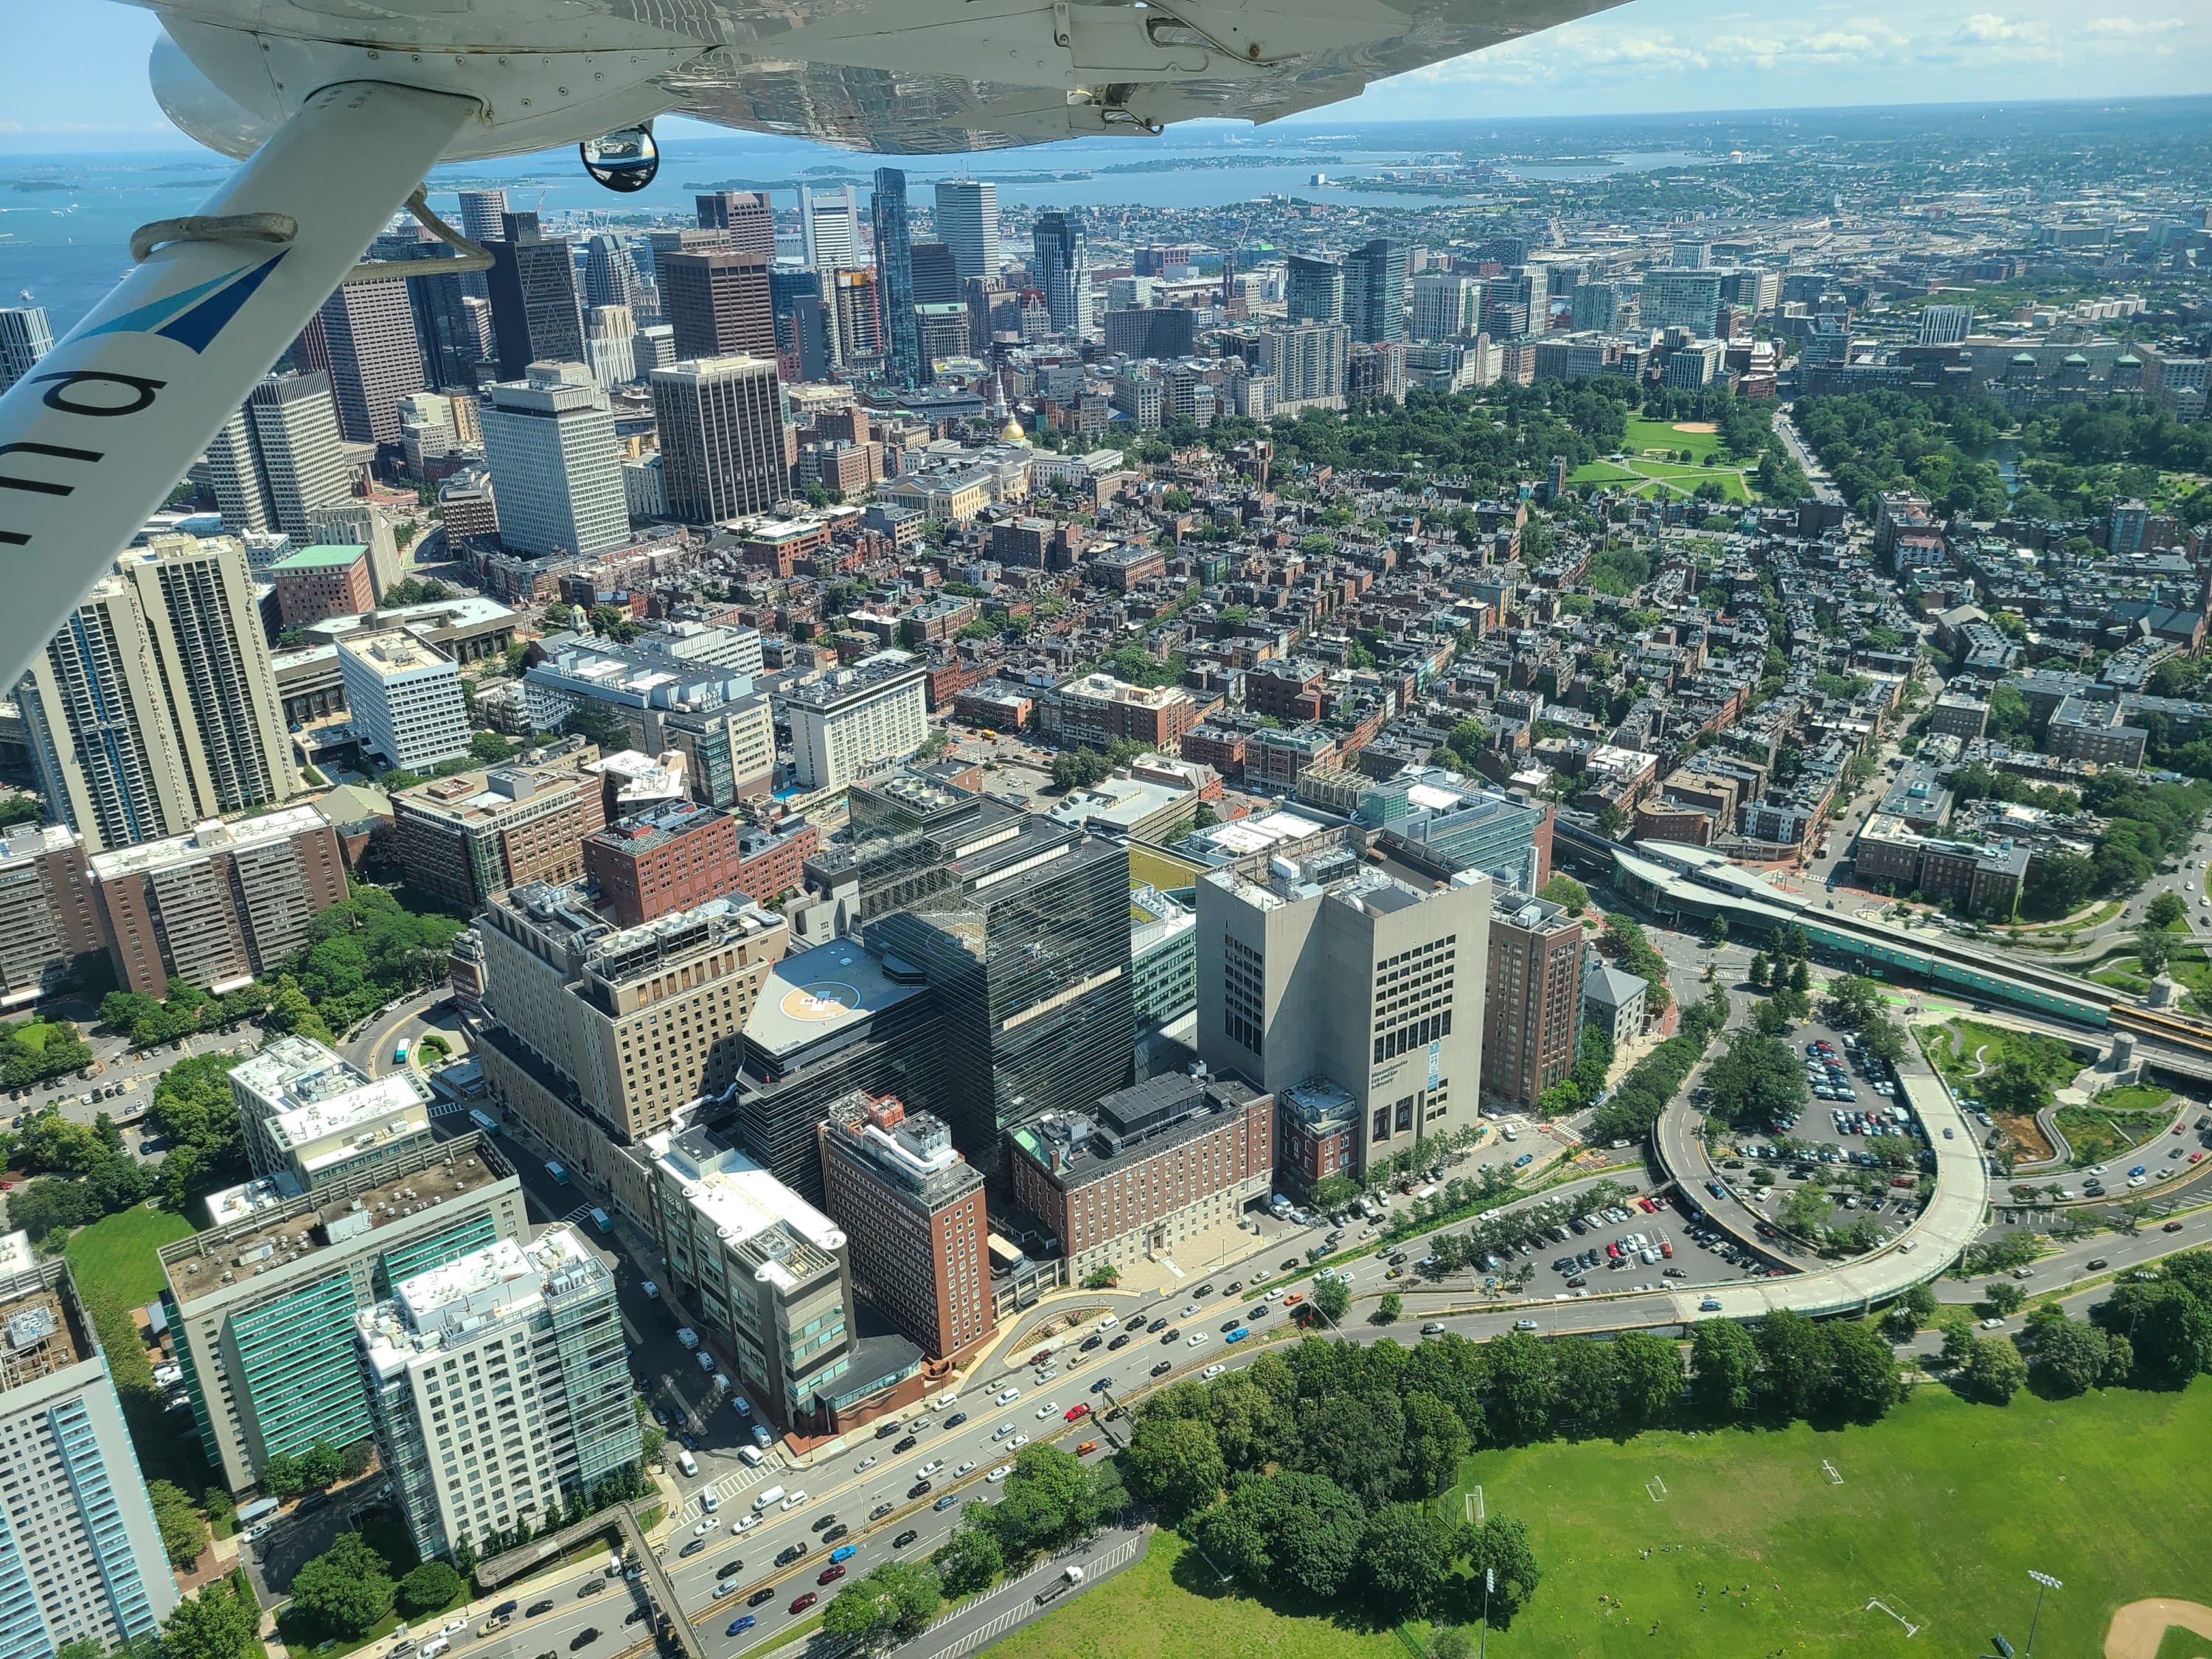 The view from a seaplane flying over Boston (Tibisay Zea/WBUR)